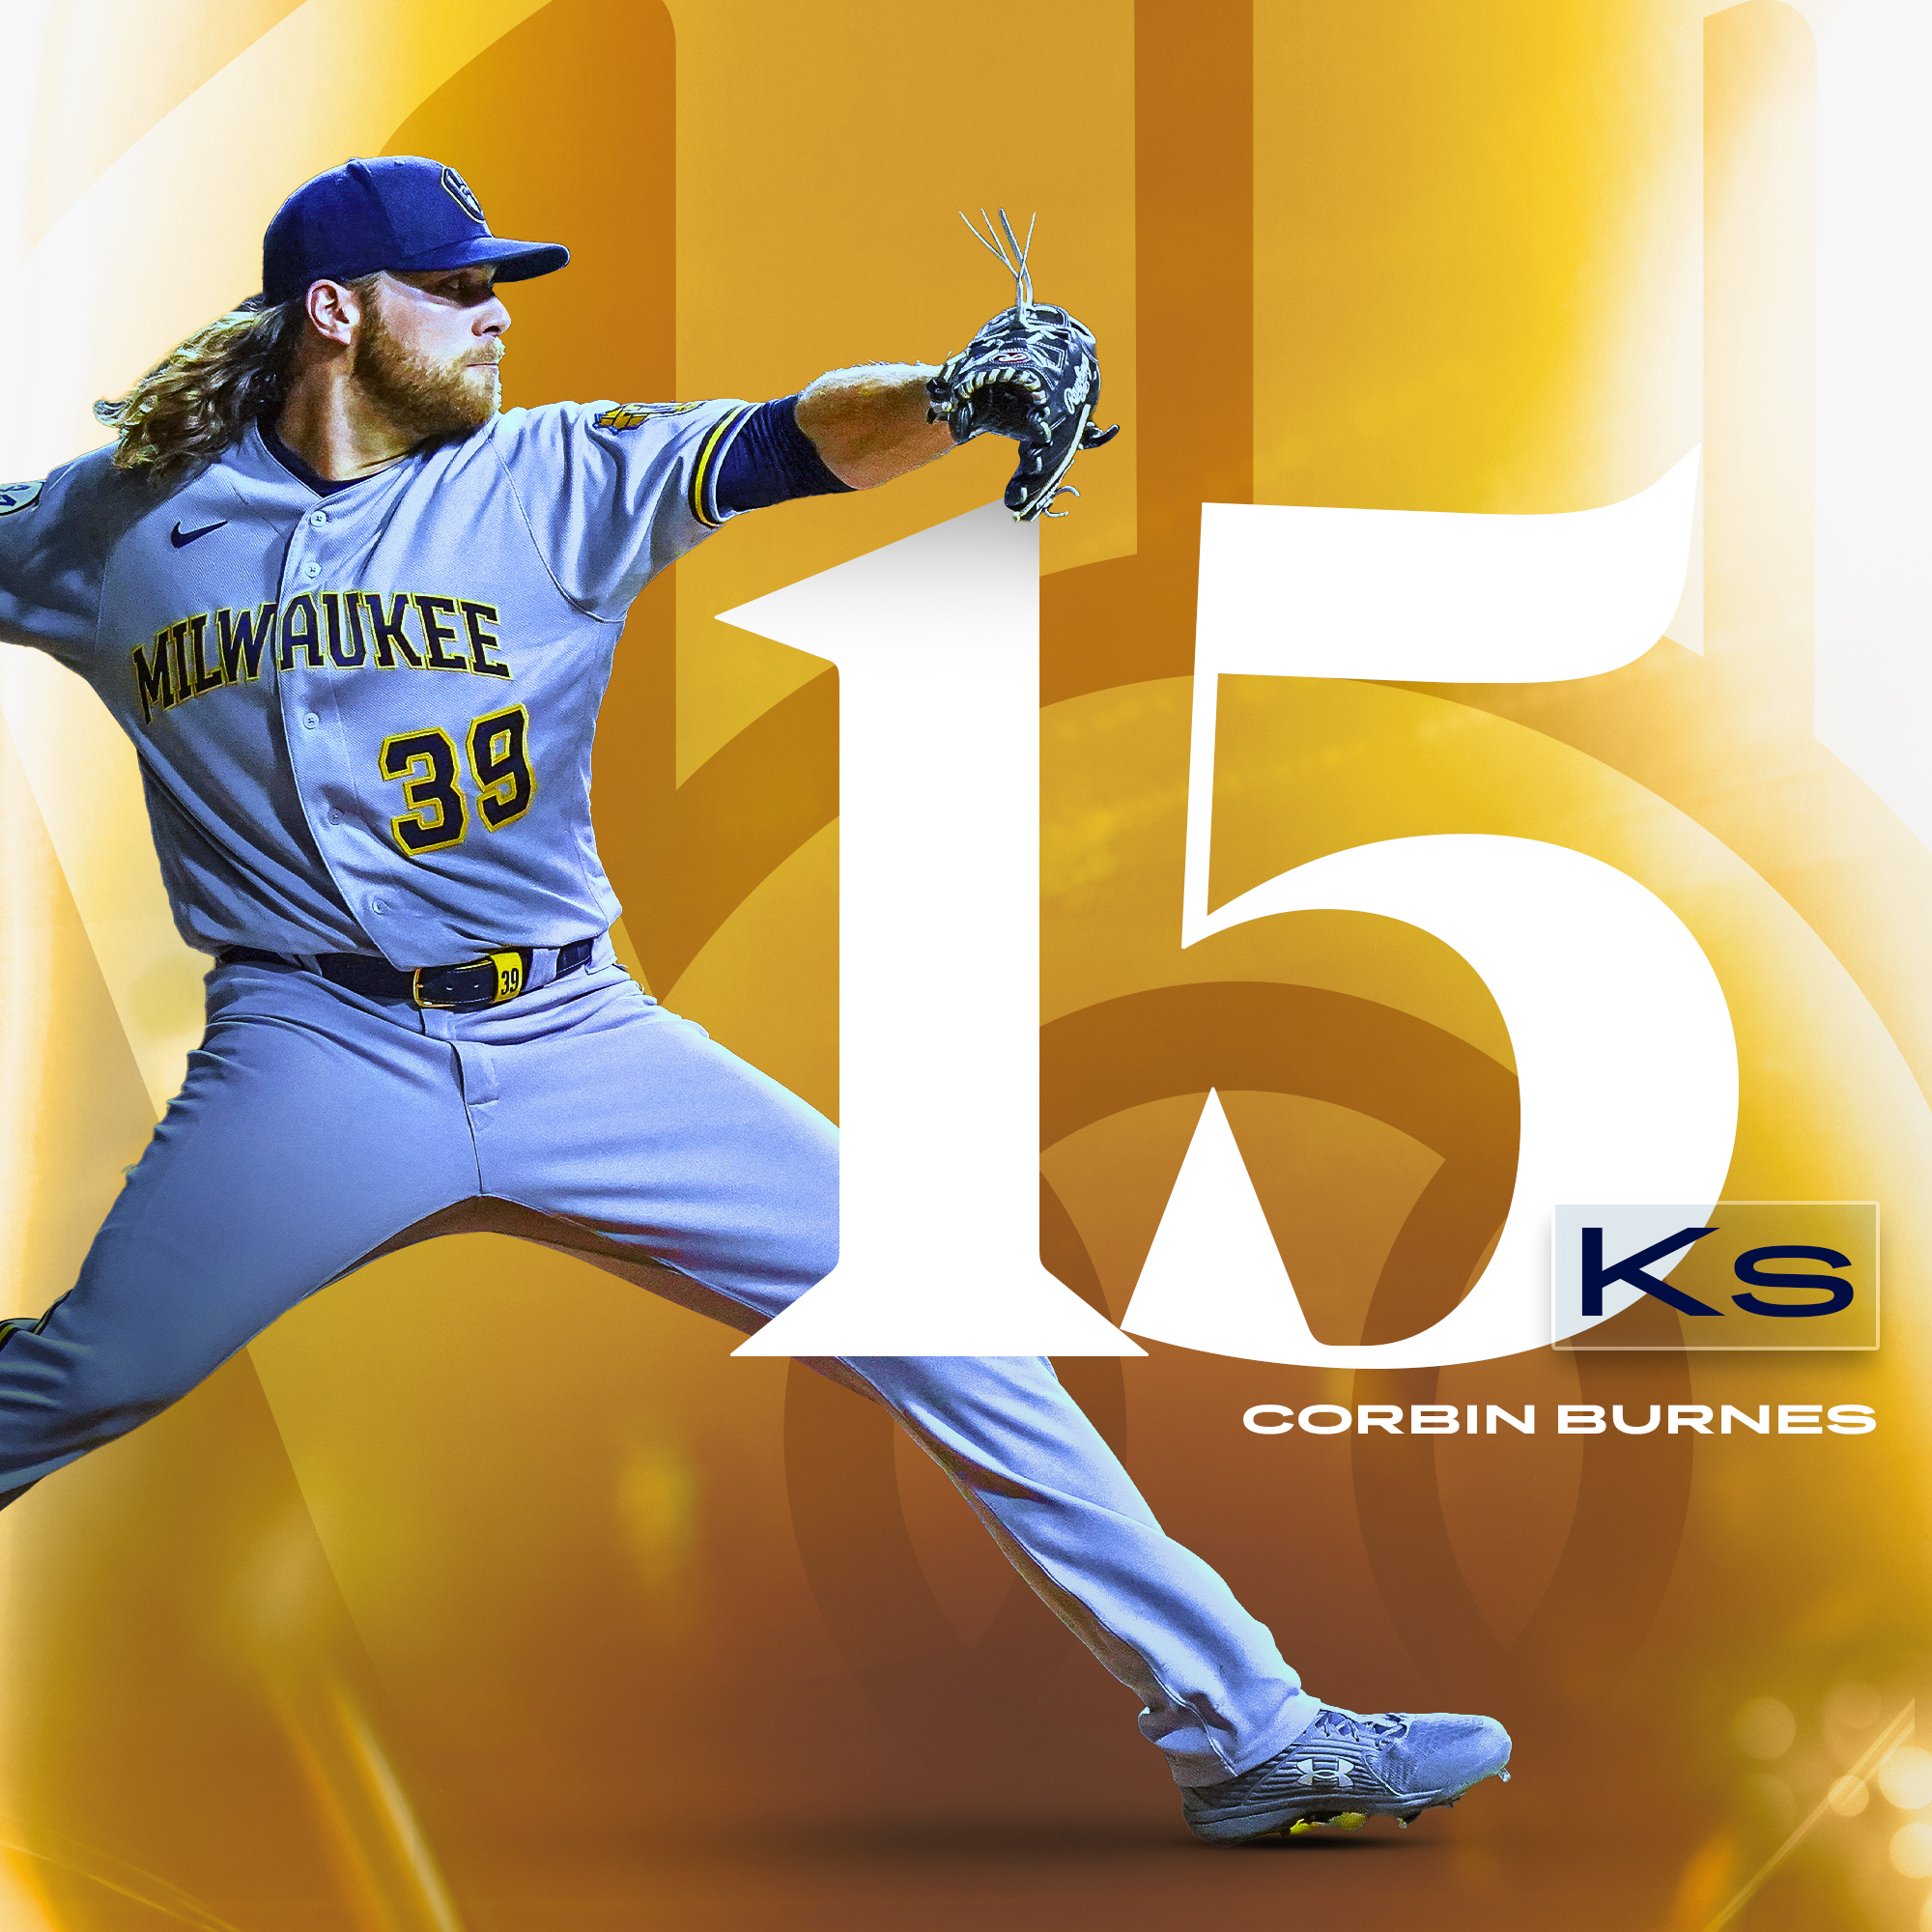 Pro Sports Outlook on X: Corbin Burnes is officially 1 of the best  pitchers in baseball: - T-most consecutive Ks (10) during 1 GP in MLB  history - Most Ks (15) without